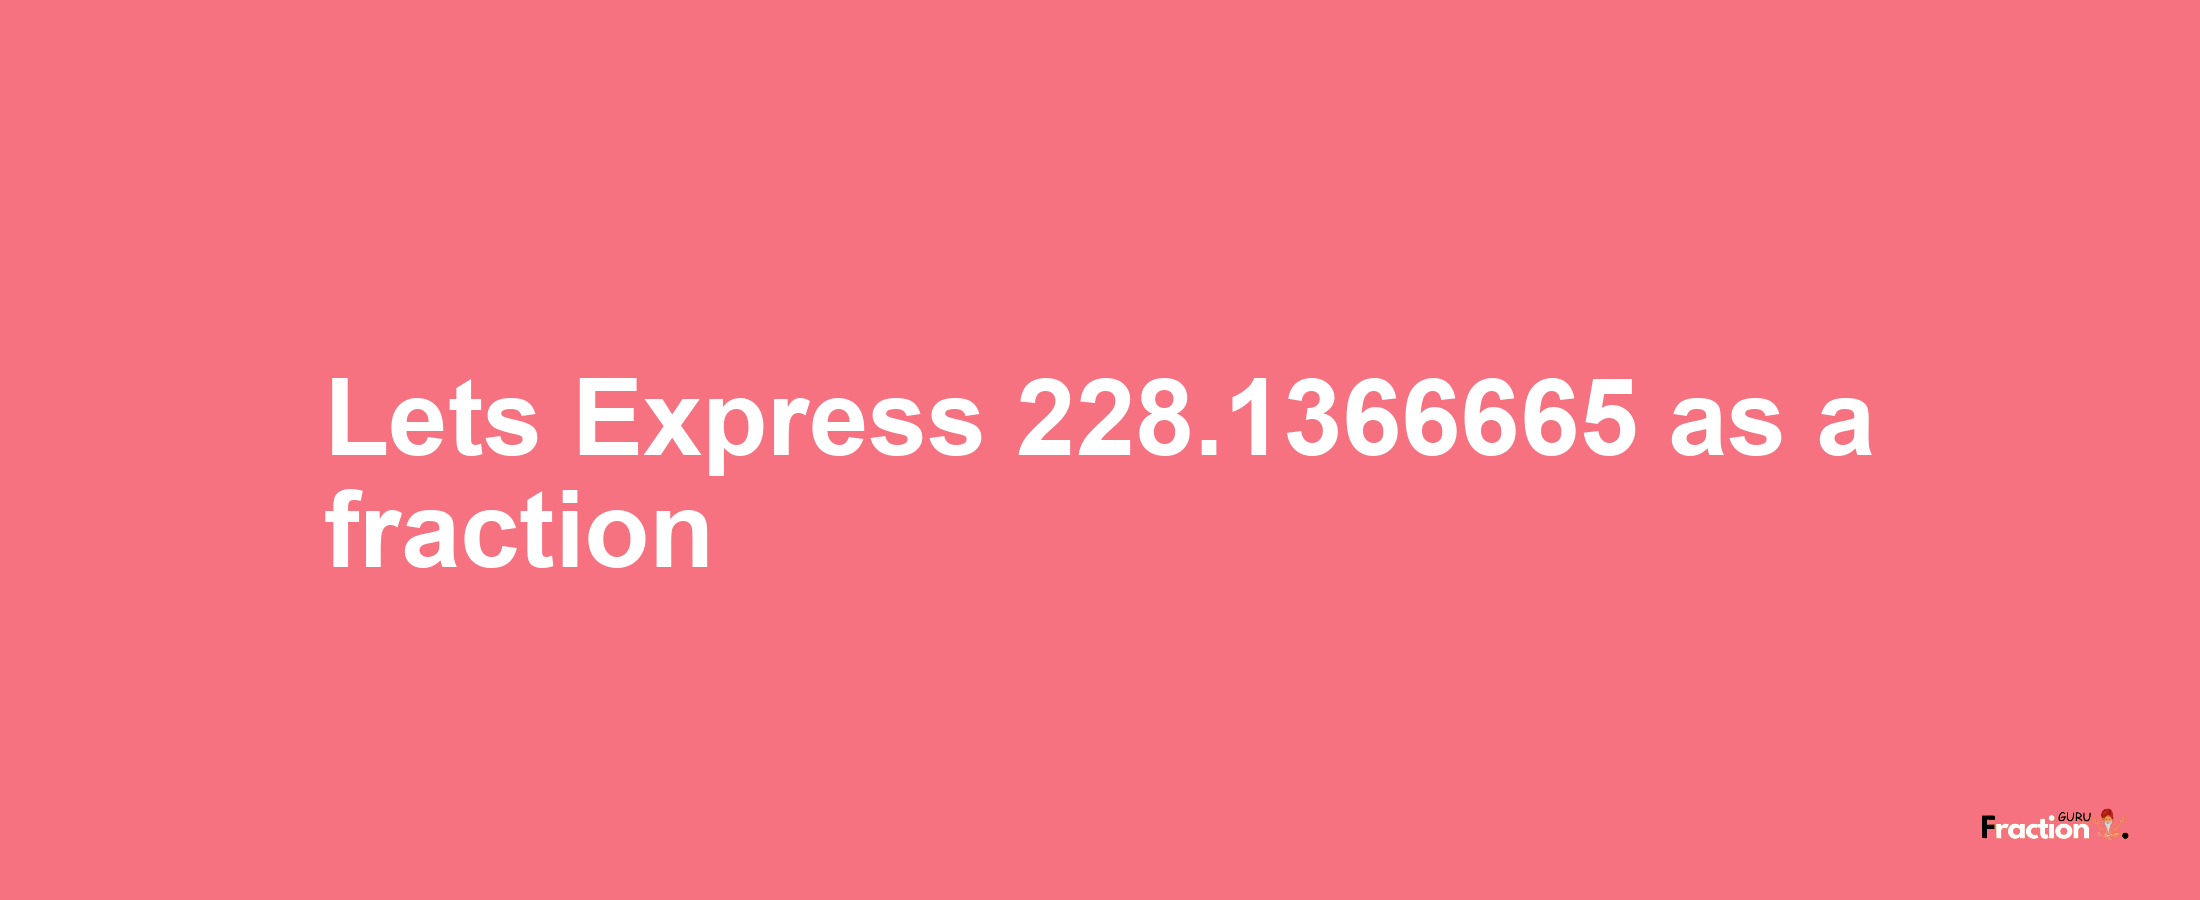 Lets Express 228.1366665 as afraction